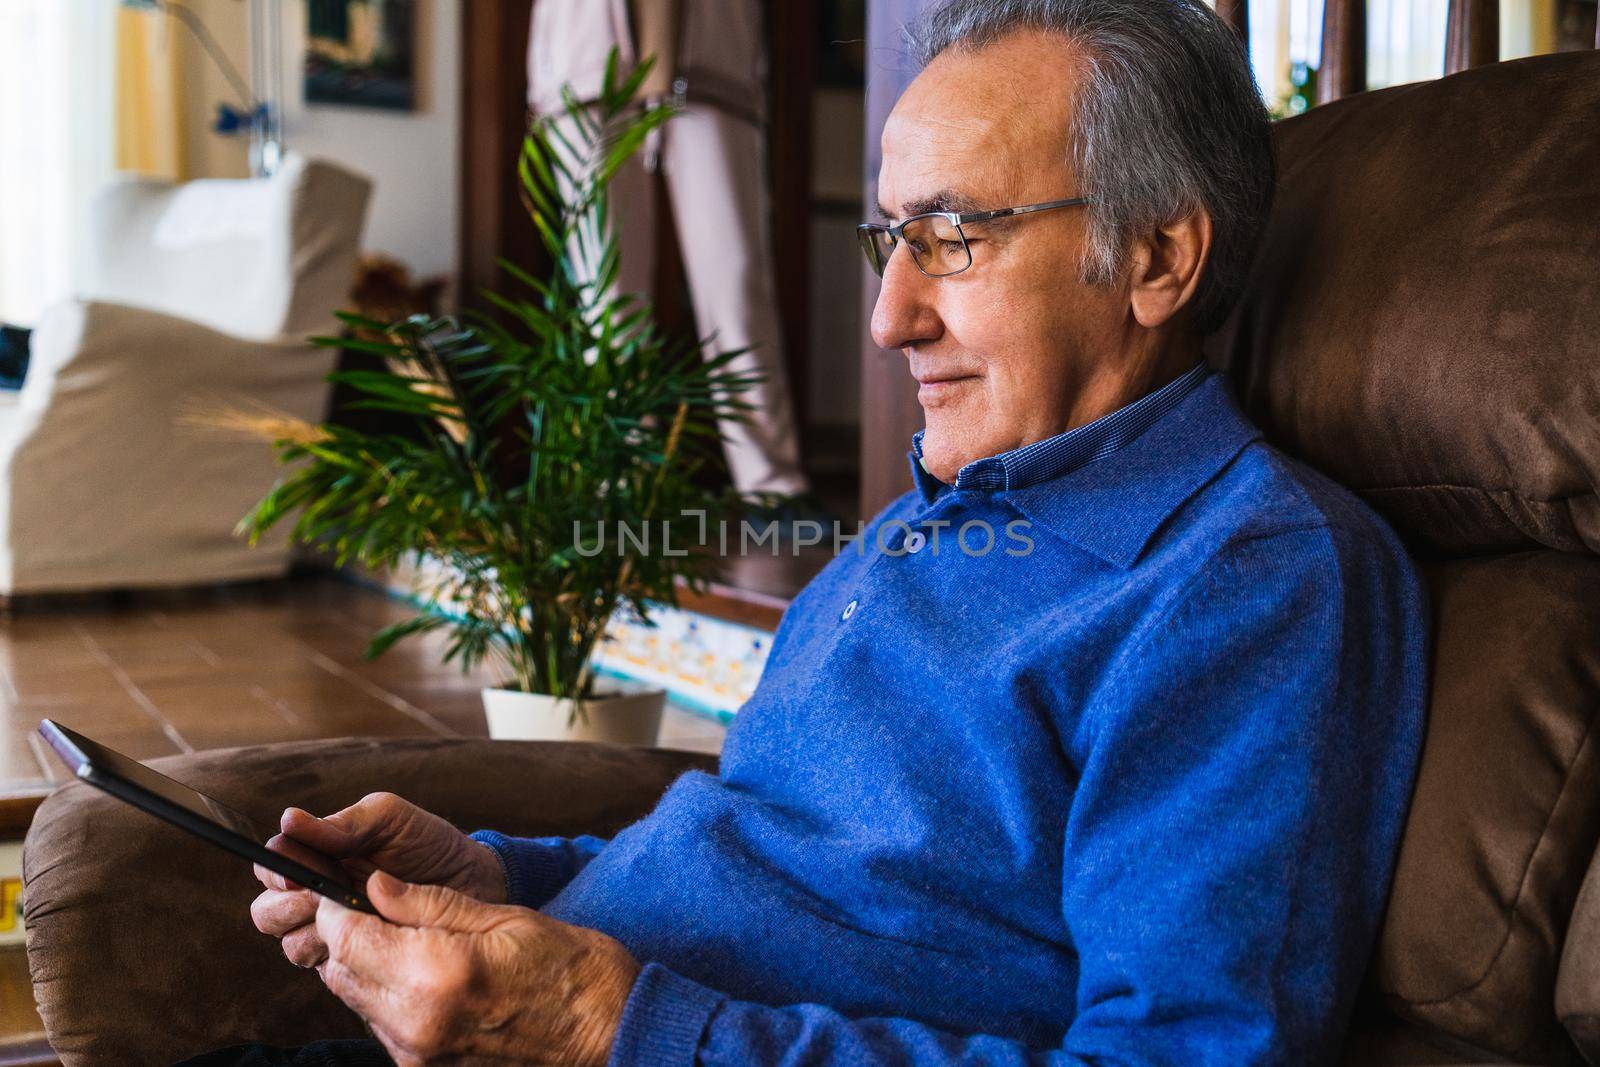 Old man looking at tablet in sofa by CatPhotography